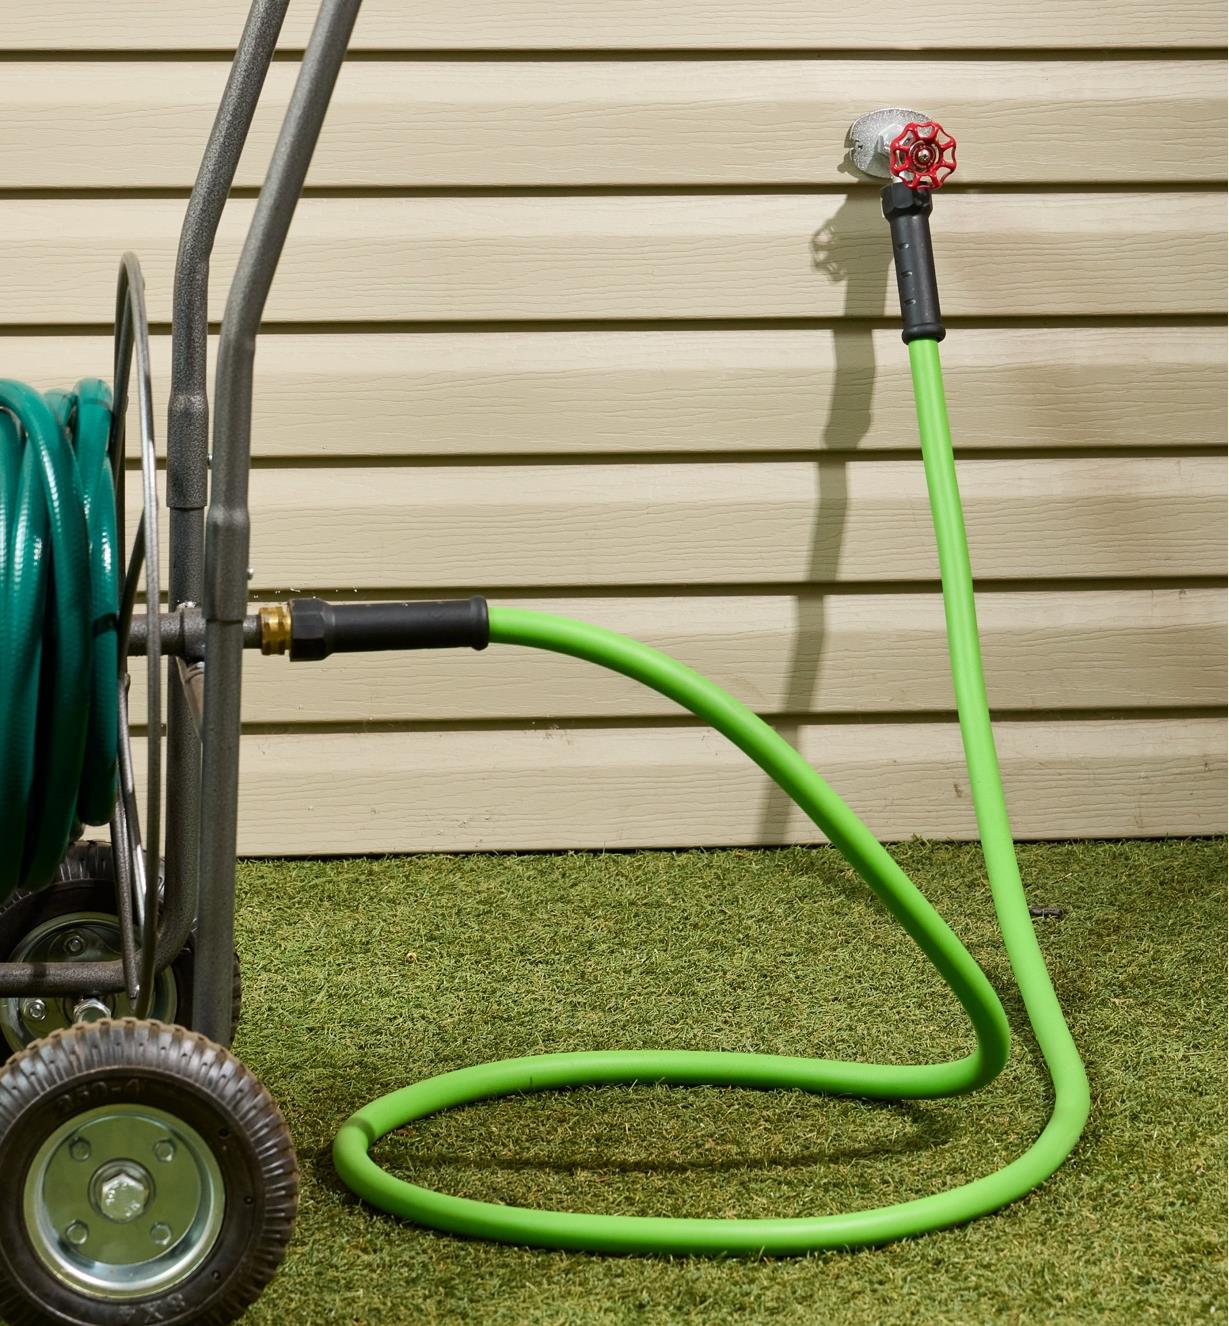 The 10’ leader hose connected to an outdoor tap on one end and a longer hose on a reel on the other end